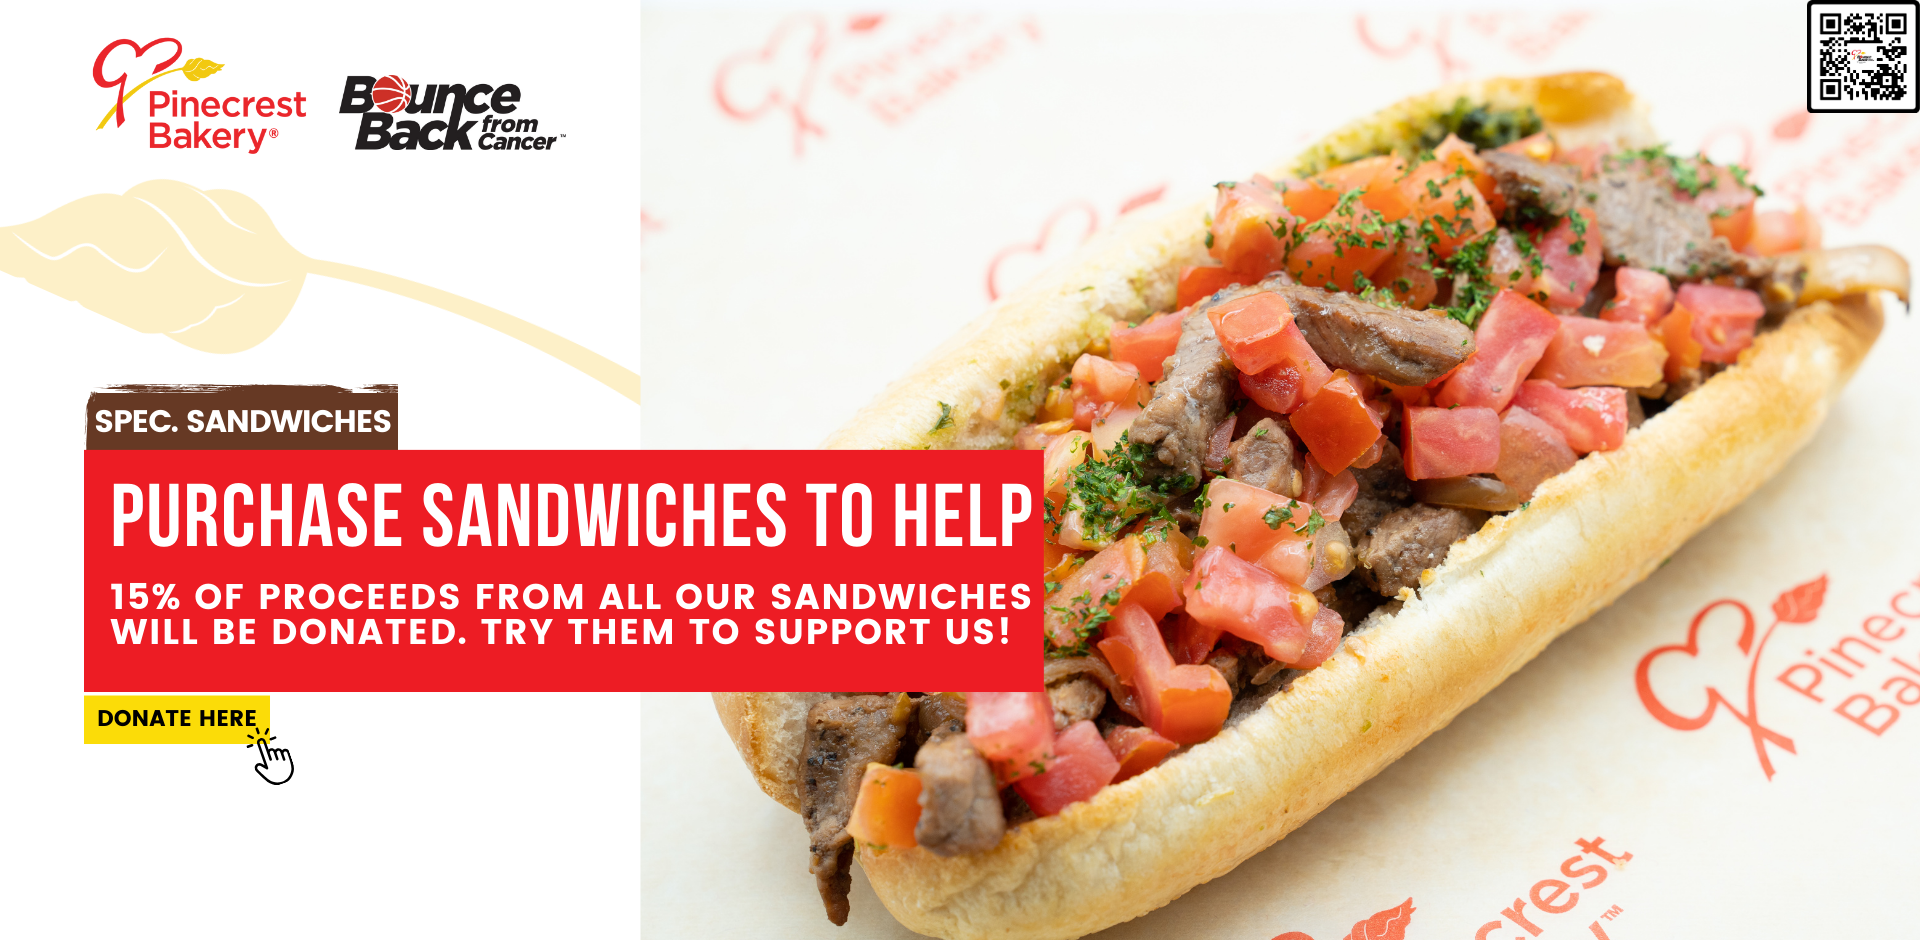 spec. sandwiches. Purchase sandwiches to help. 15% of proceeds from all our sandwiches will be donated. Try them to support us! DONATE HERE